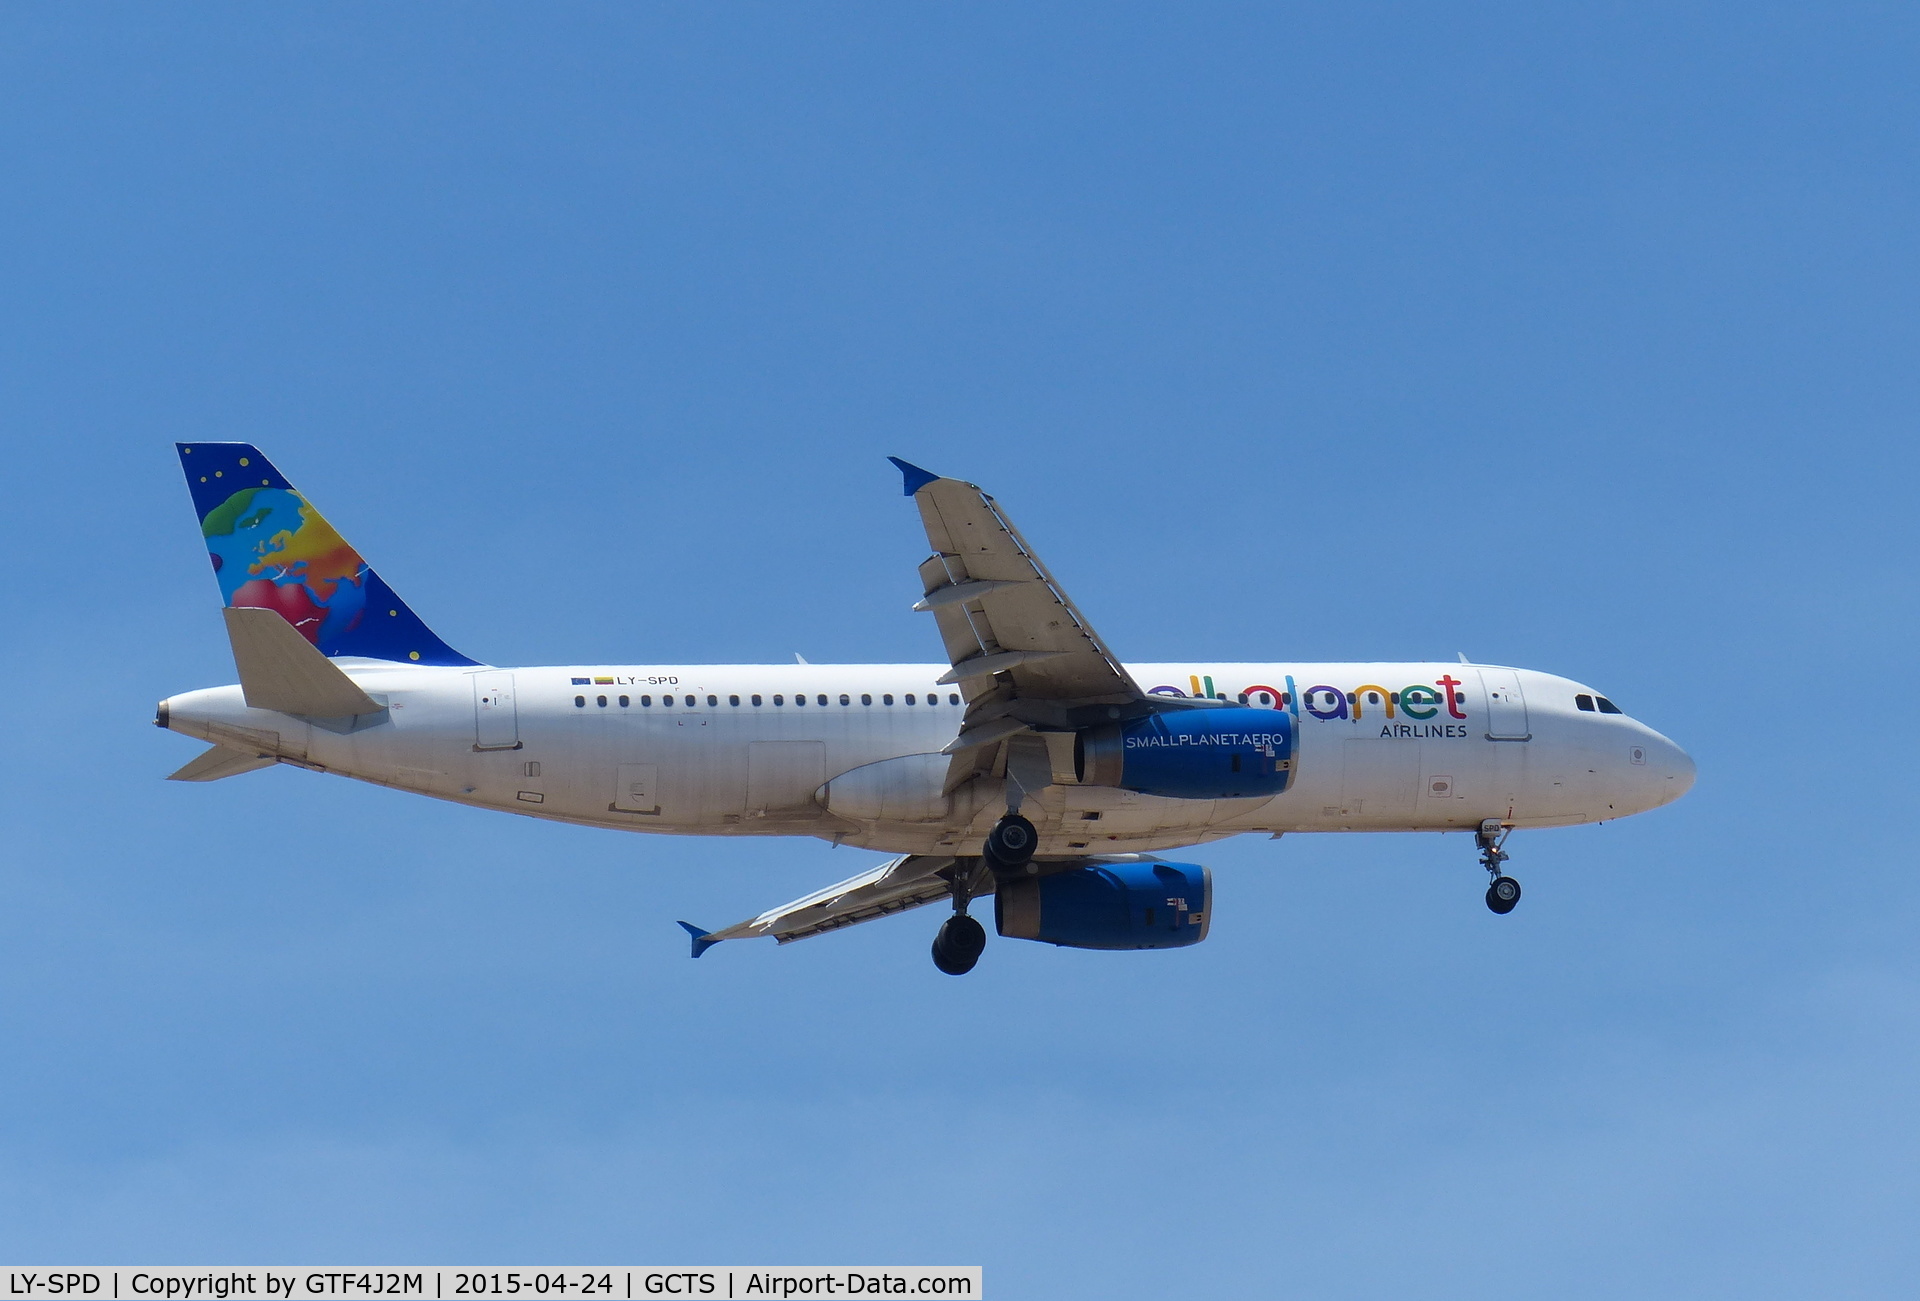 LY-SPD, 1999 Airbus A320-232 C/N 0990, LY-SPD  Small Planet AL  on approach to Tenerife South 24.4.15